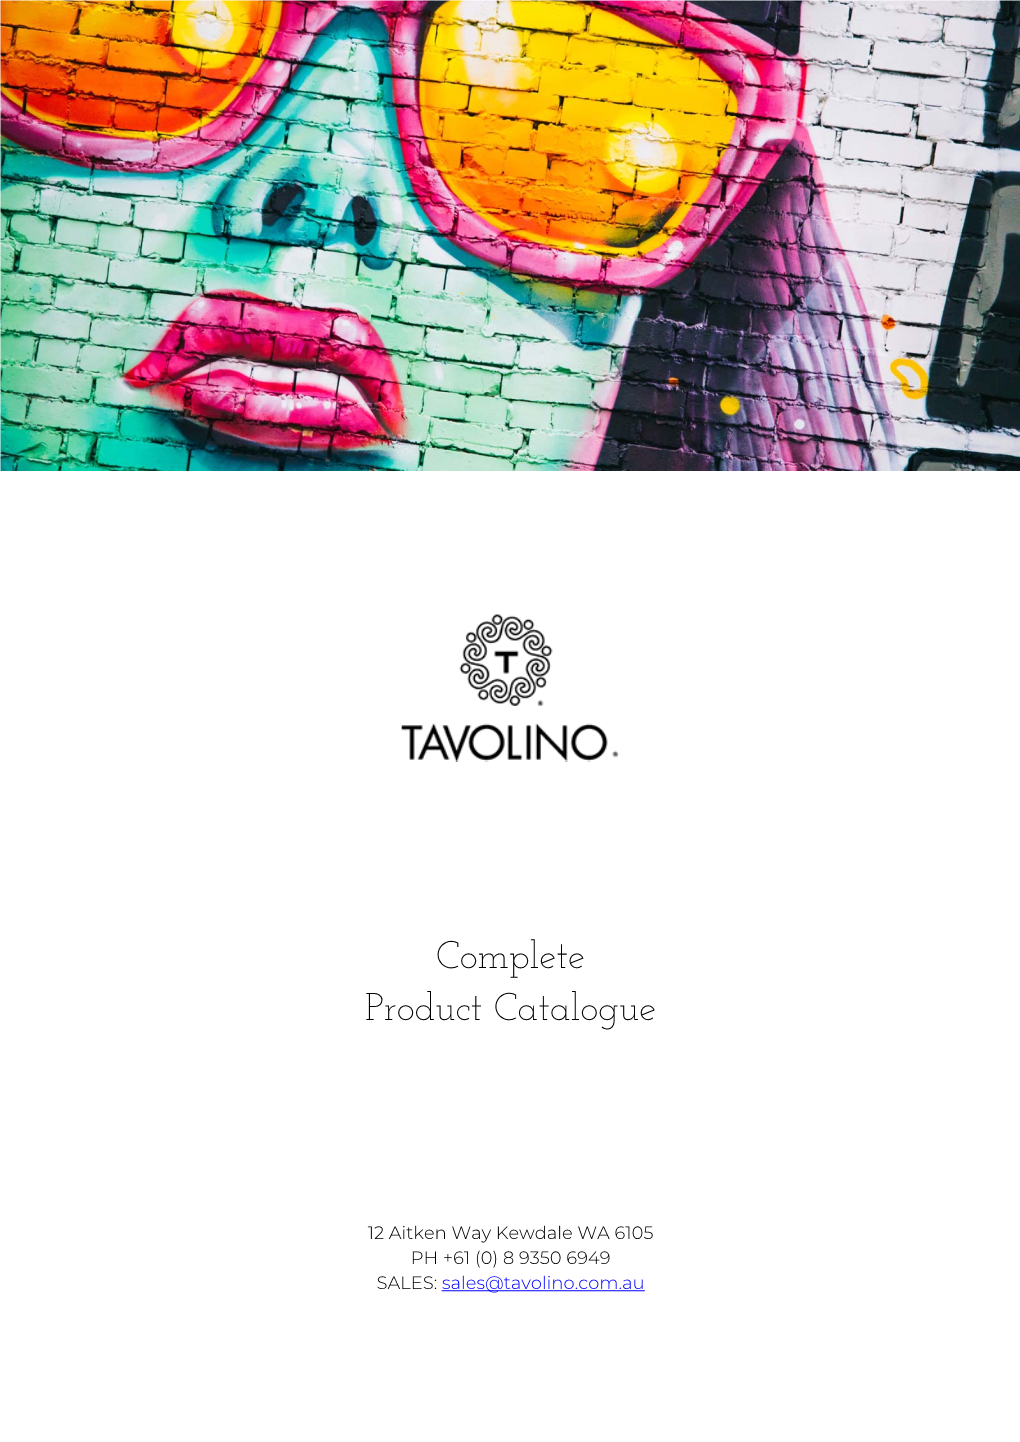 Complete Product Catalogue